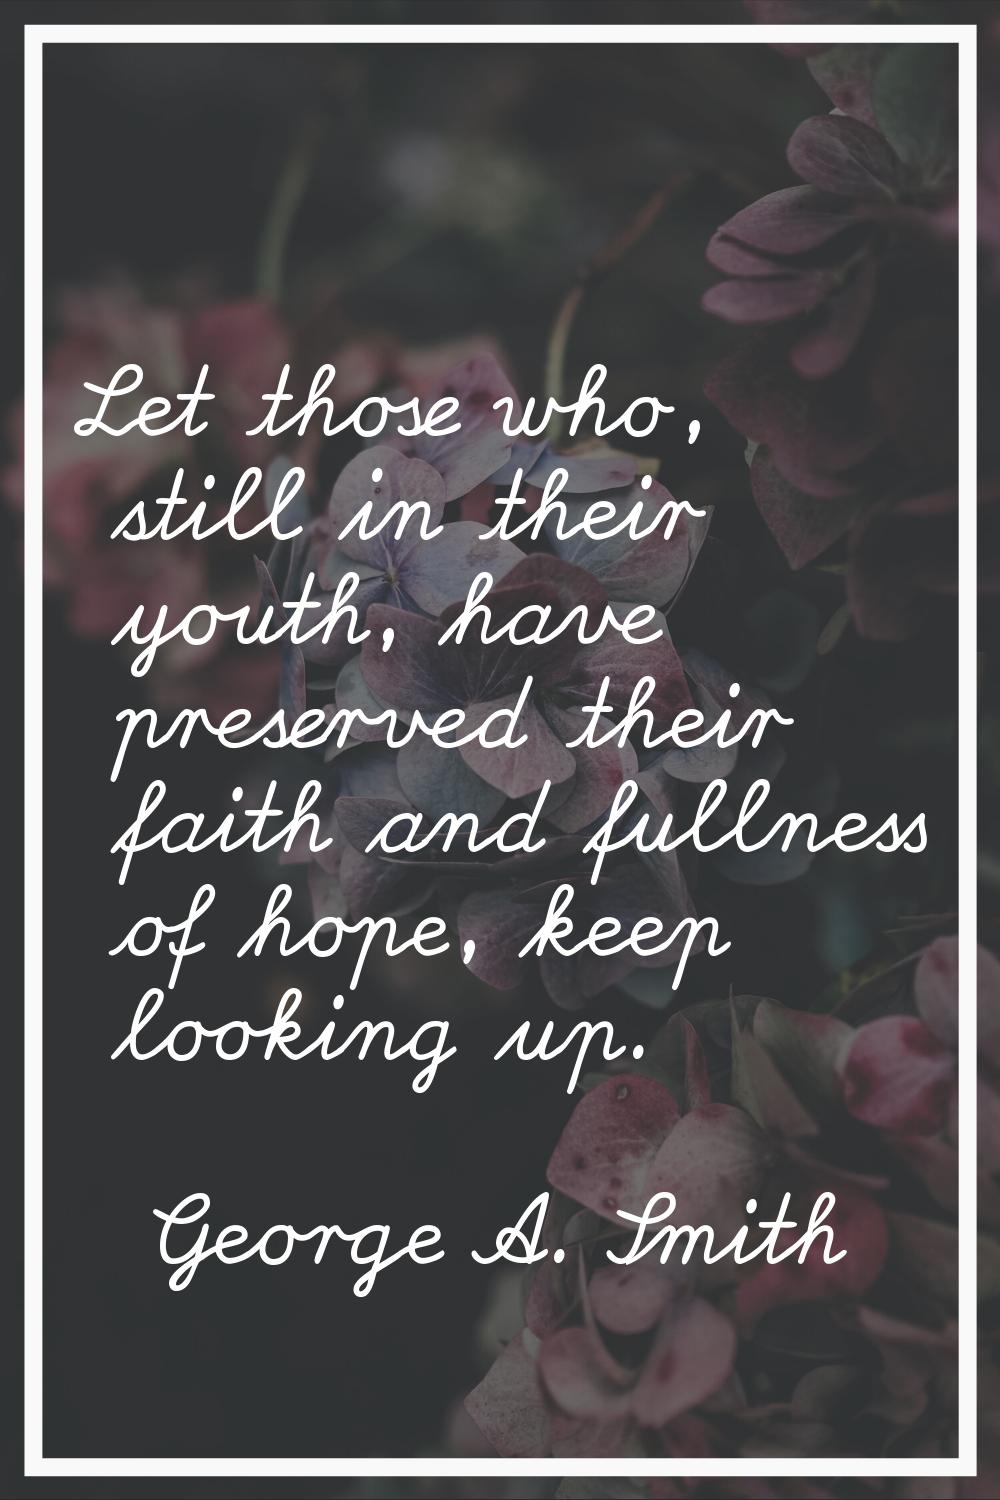 Let those who, still in their youth, have preserved their faith and fullness of hope, keep looking 